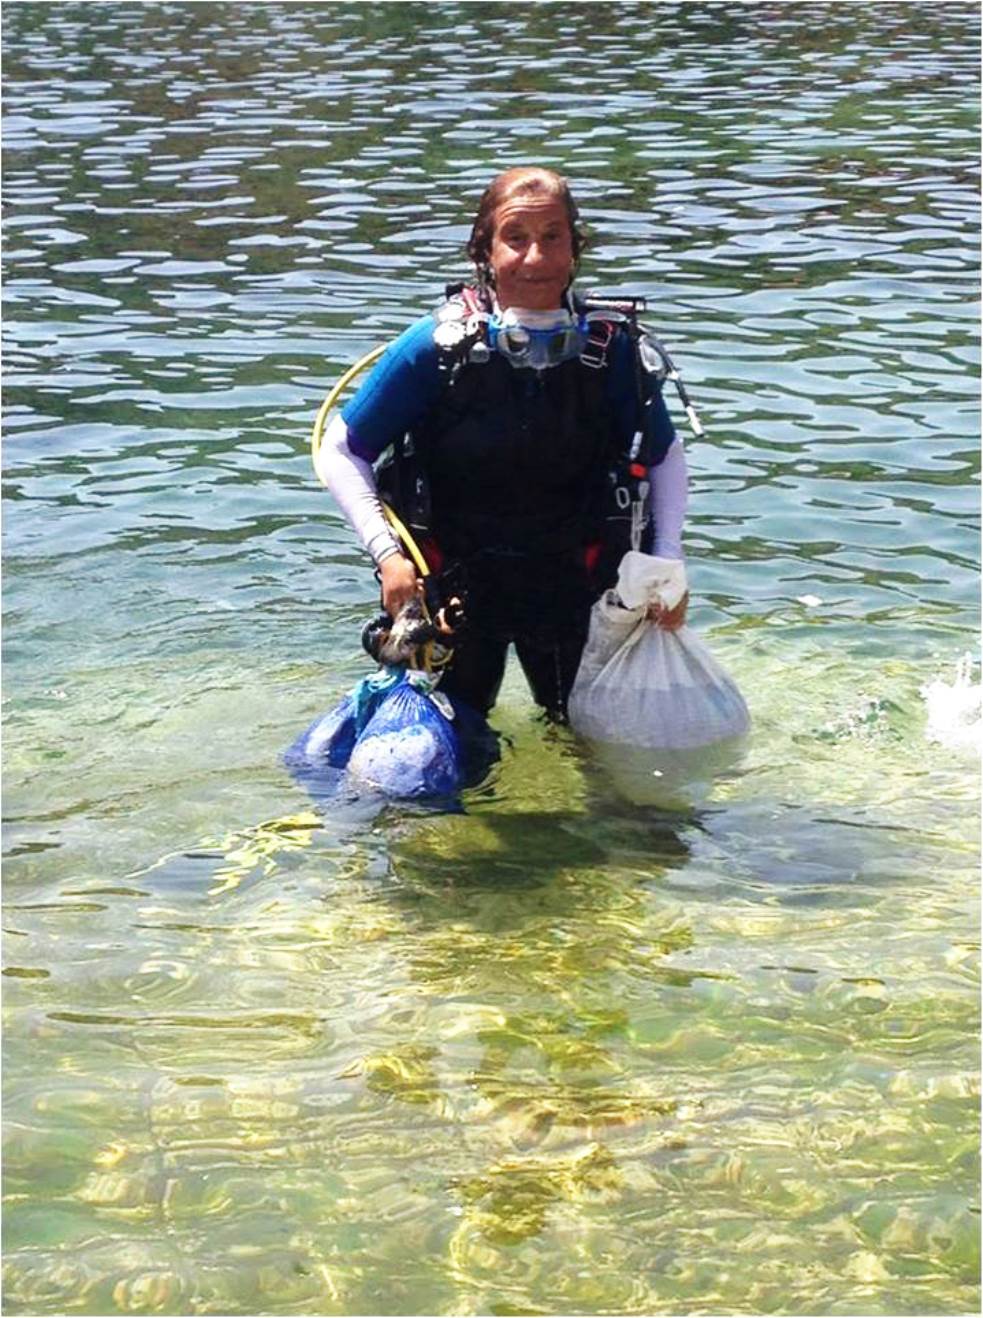 Woman standing in the water, holding up plastic bags.